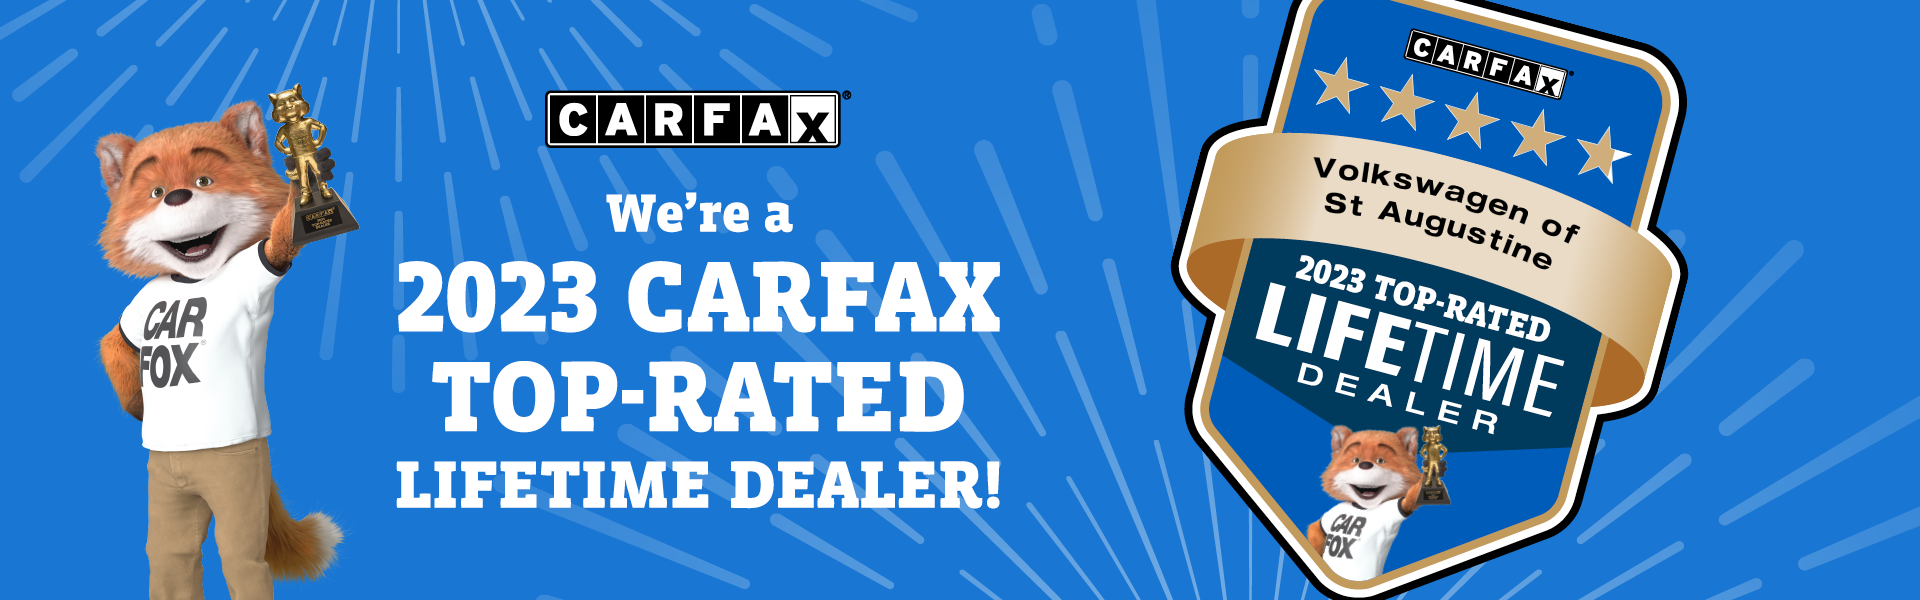 Carfax-Top-Rated-Dealer-Augustine-FL